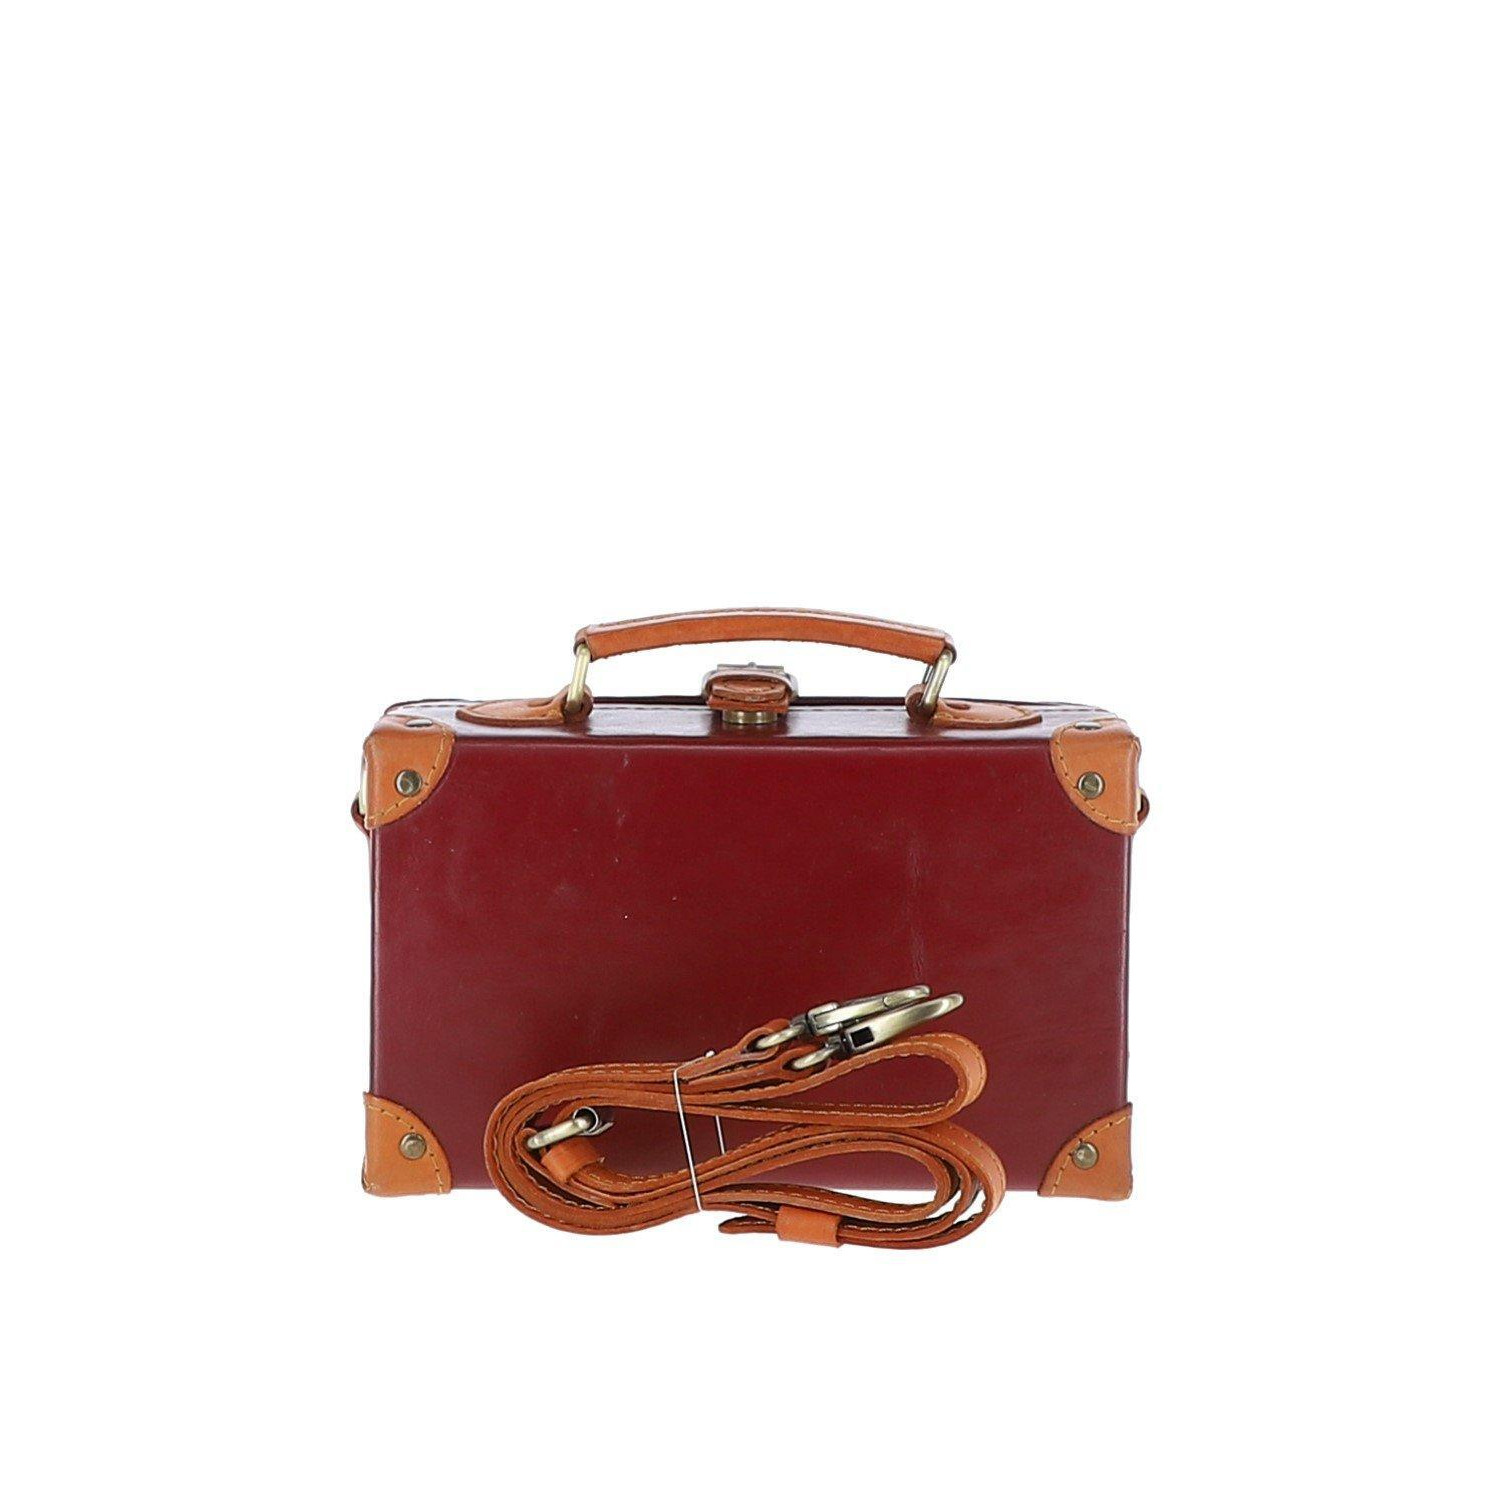 'Tramonto' Home Accessory Exquisite Leather Box - image 1